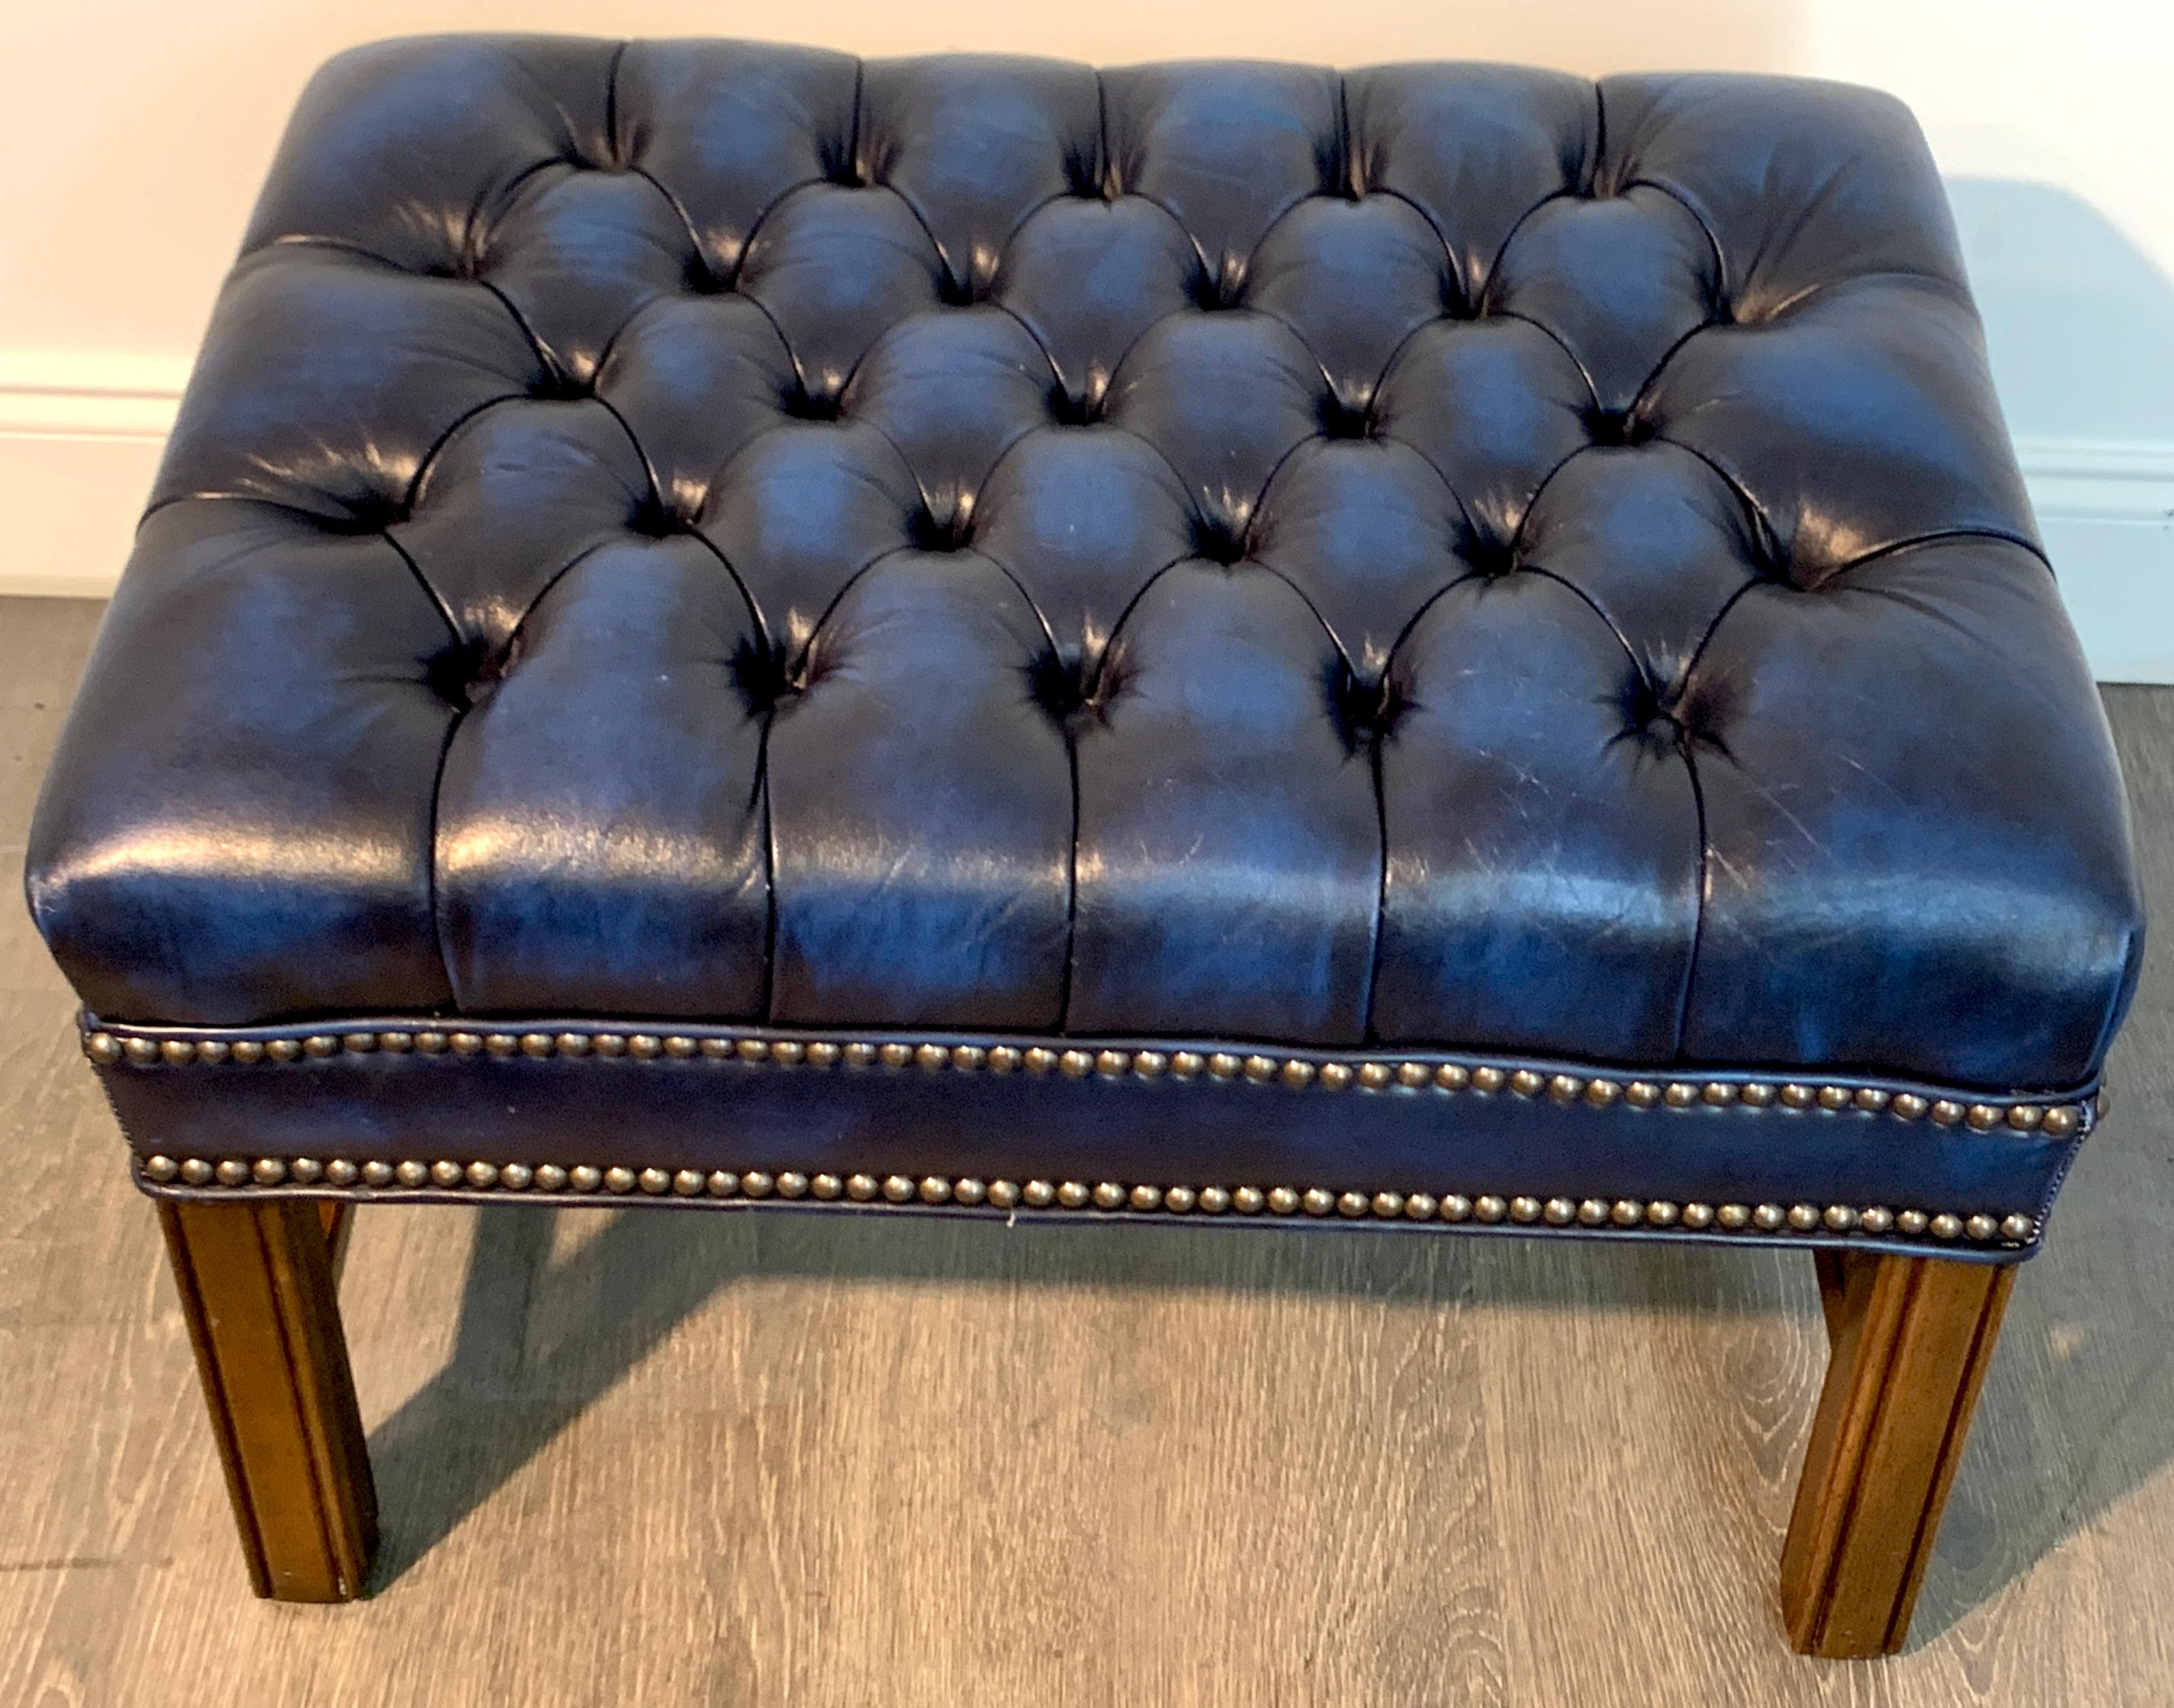 20th Century Pair of English Hollywood Regency Blue Leather Chesterfield Benches/Ottomans